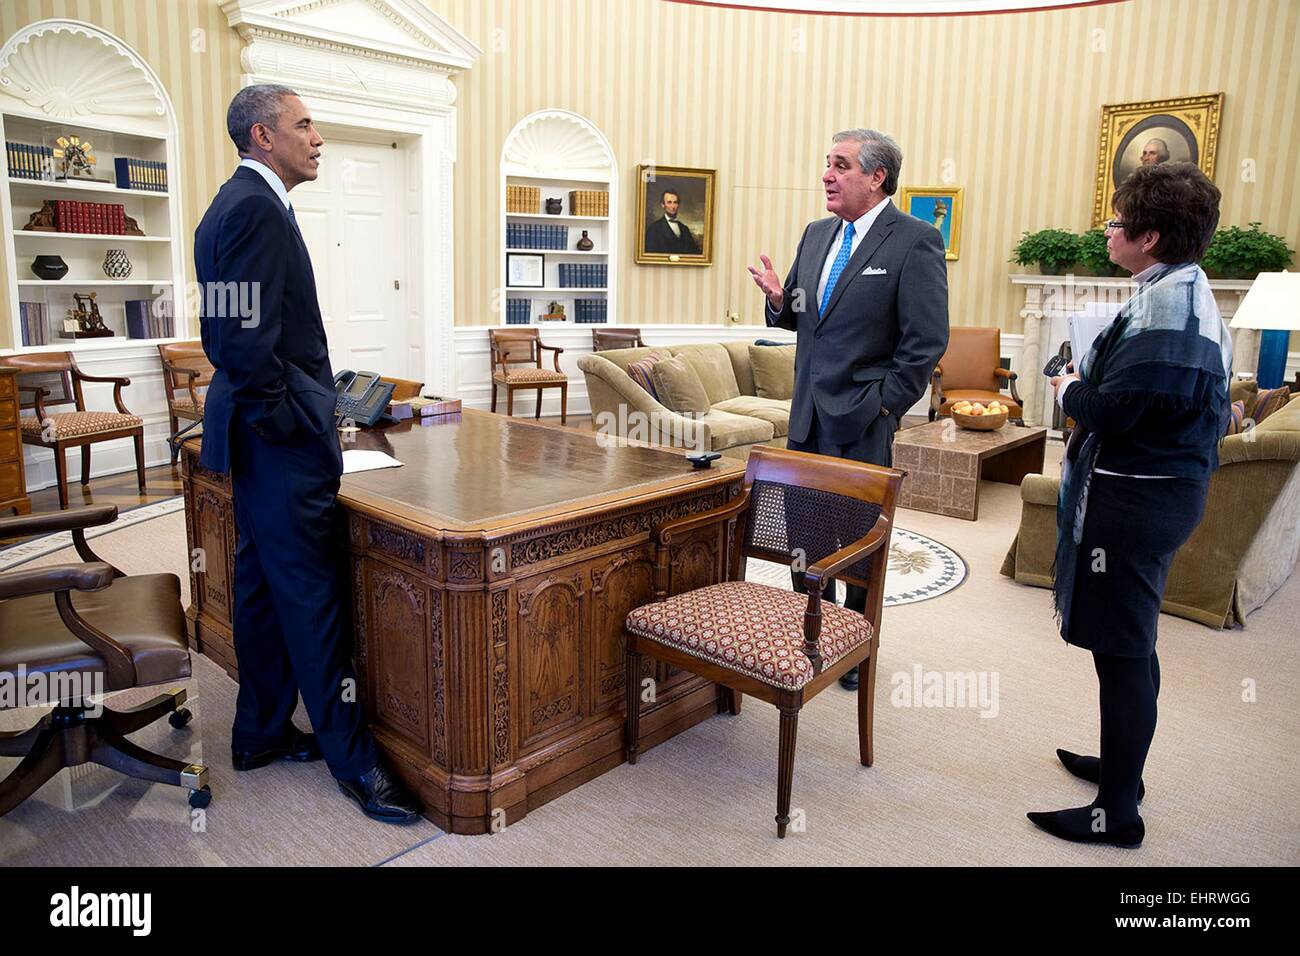 US President Barack Obama meets with Jerry Abramson, Director of Intergovernmental Affairs and Senior Advisor Valerie Jarrett in the Oval Office of the White House November 18, 2014 in Washington, DC. Stock Photo